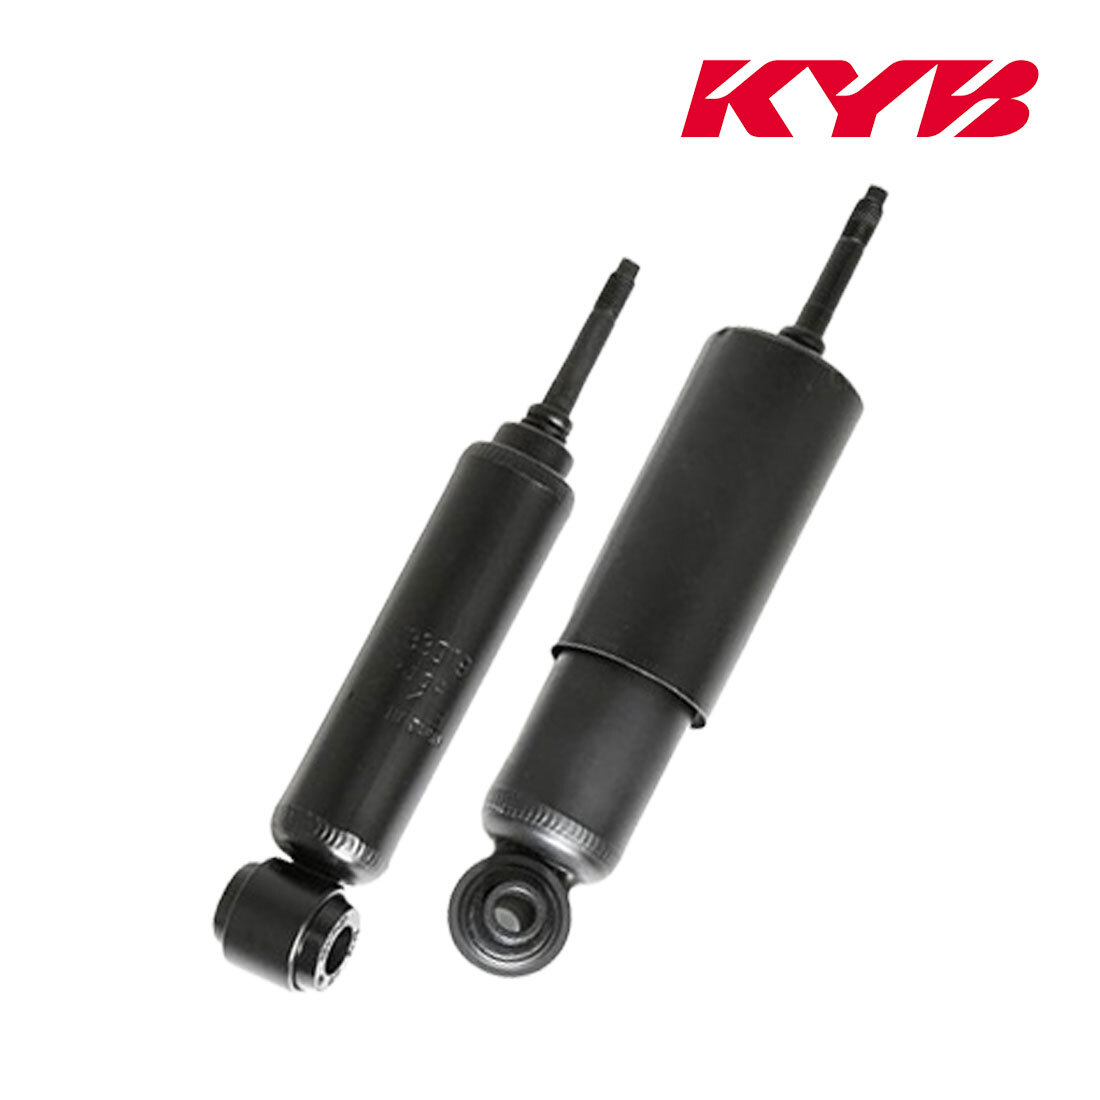 KYB KYB for repair shock absorber rear left right 2 pcs set Elf NKR81AN product number KSA1411/KSA1411 gome private person shipping possible 